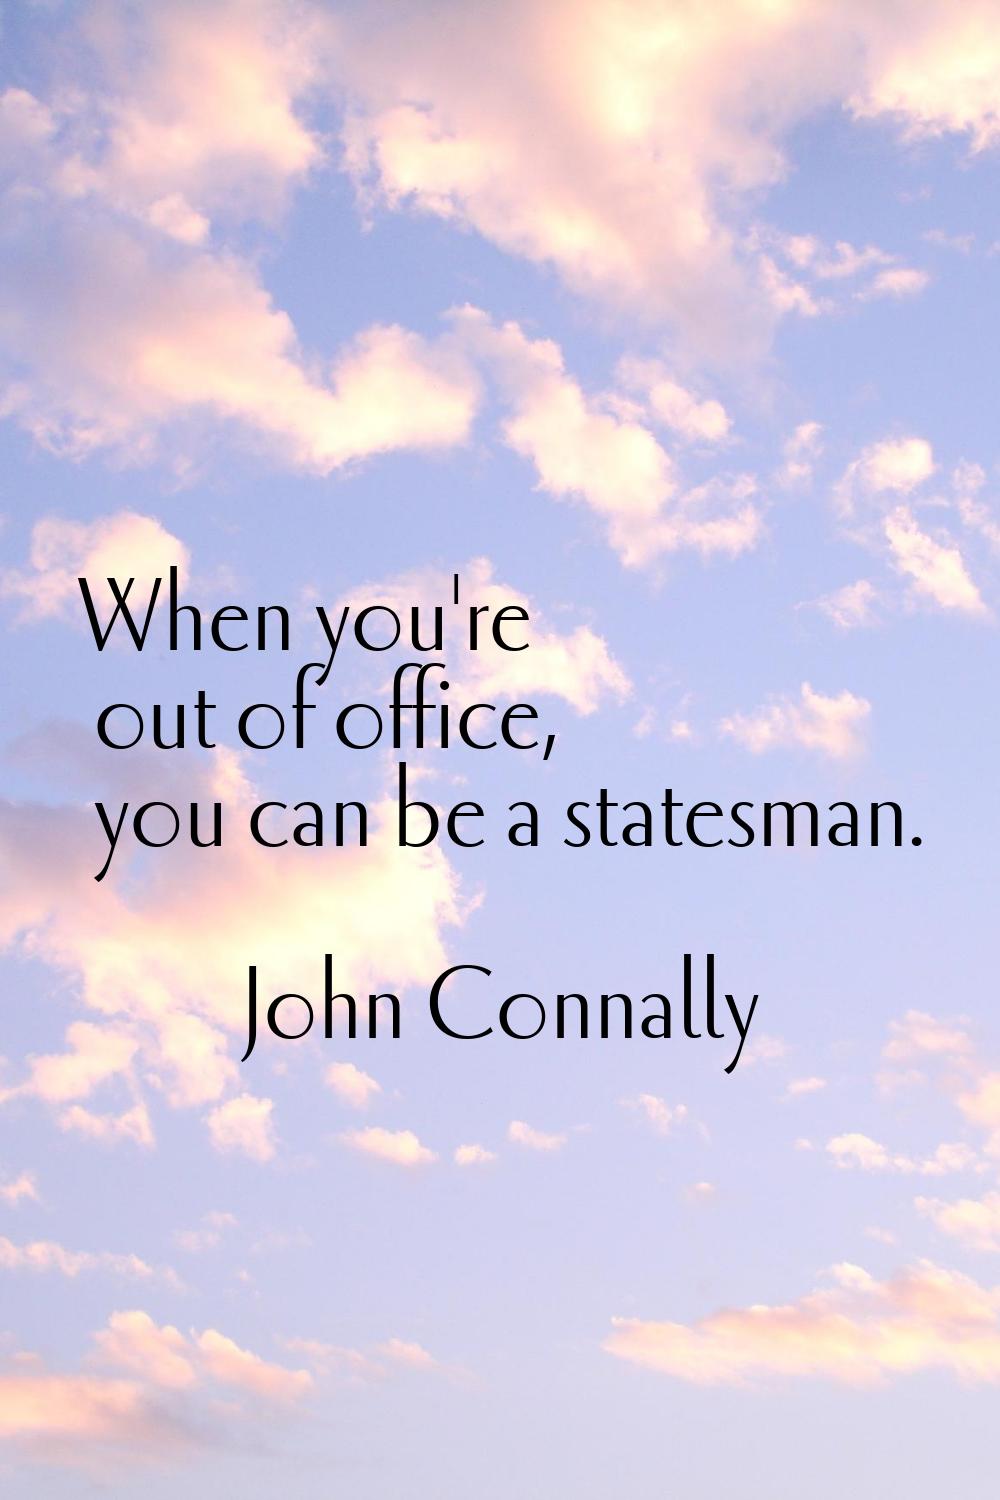 When you're out of office, you can be a statesman.